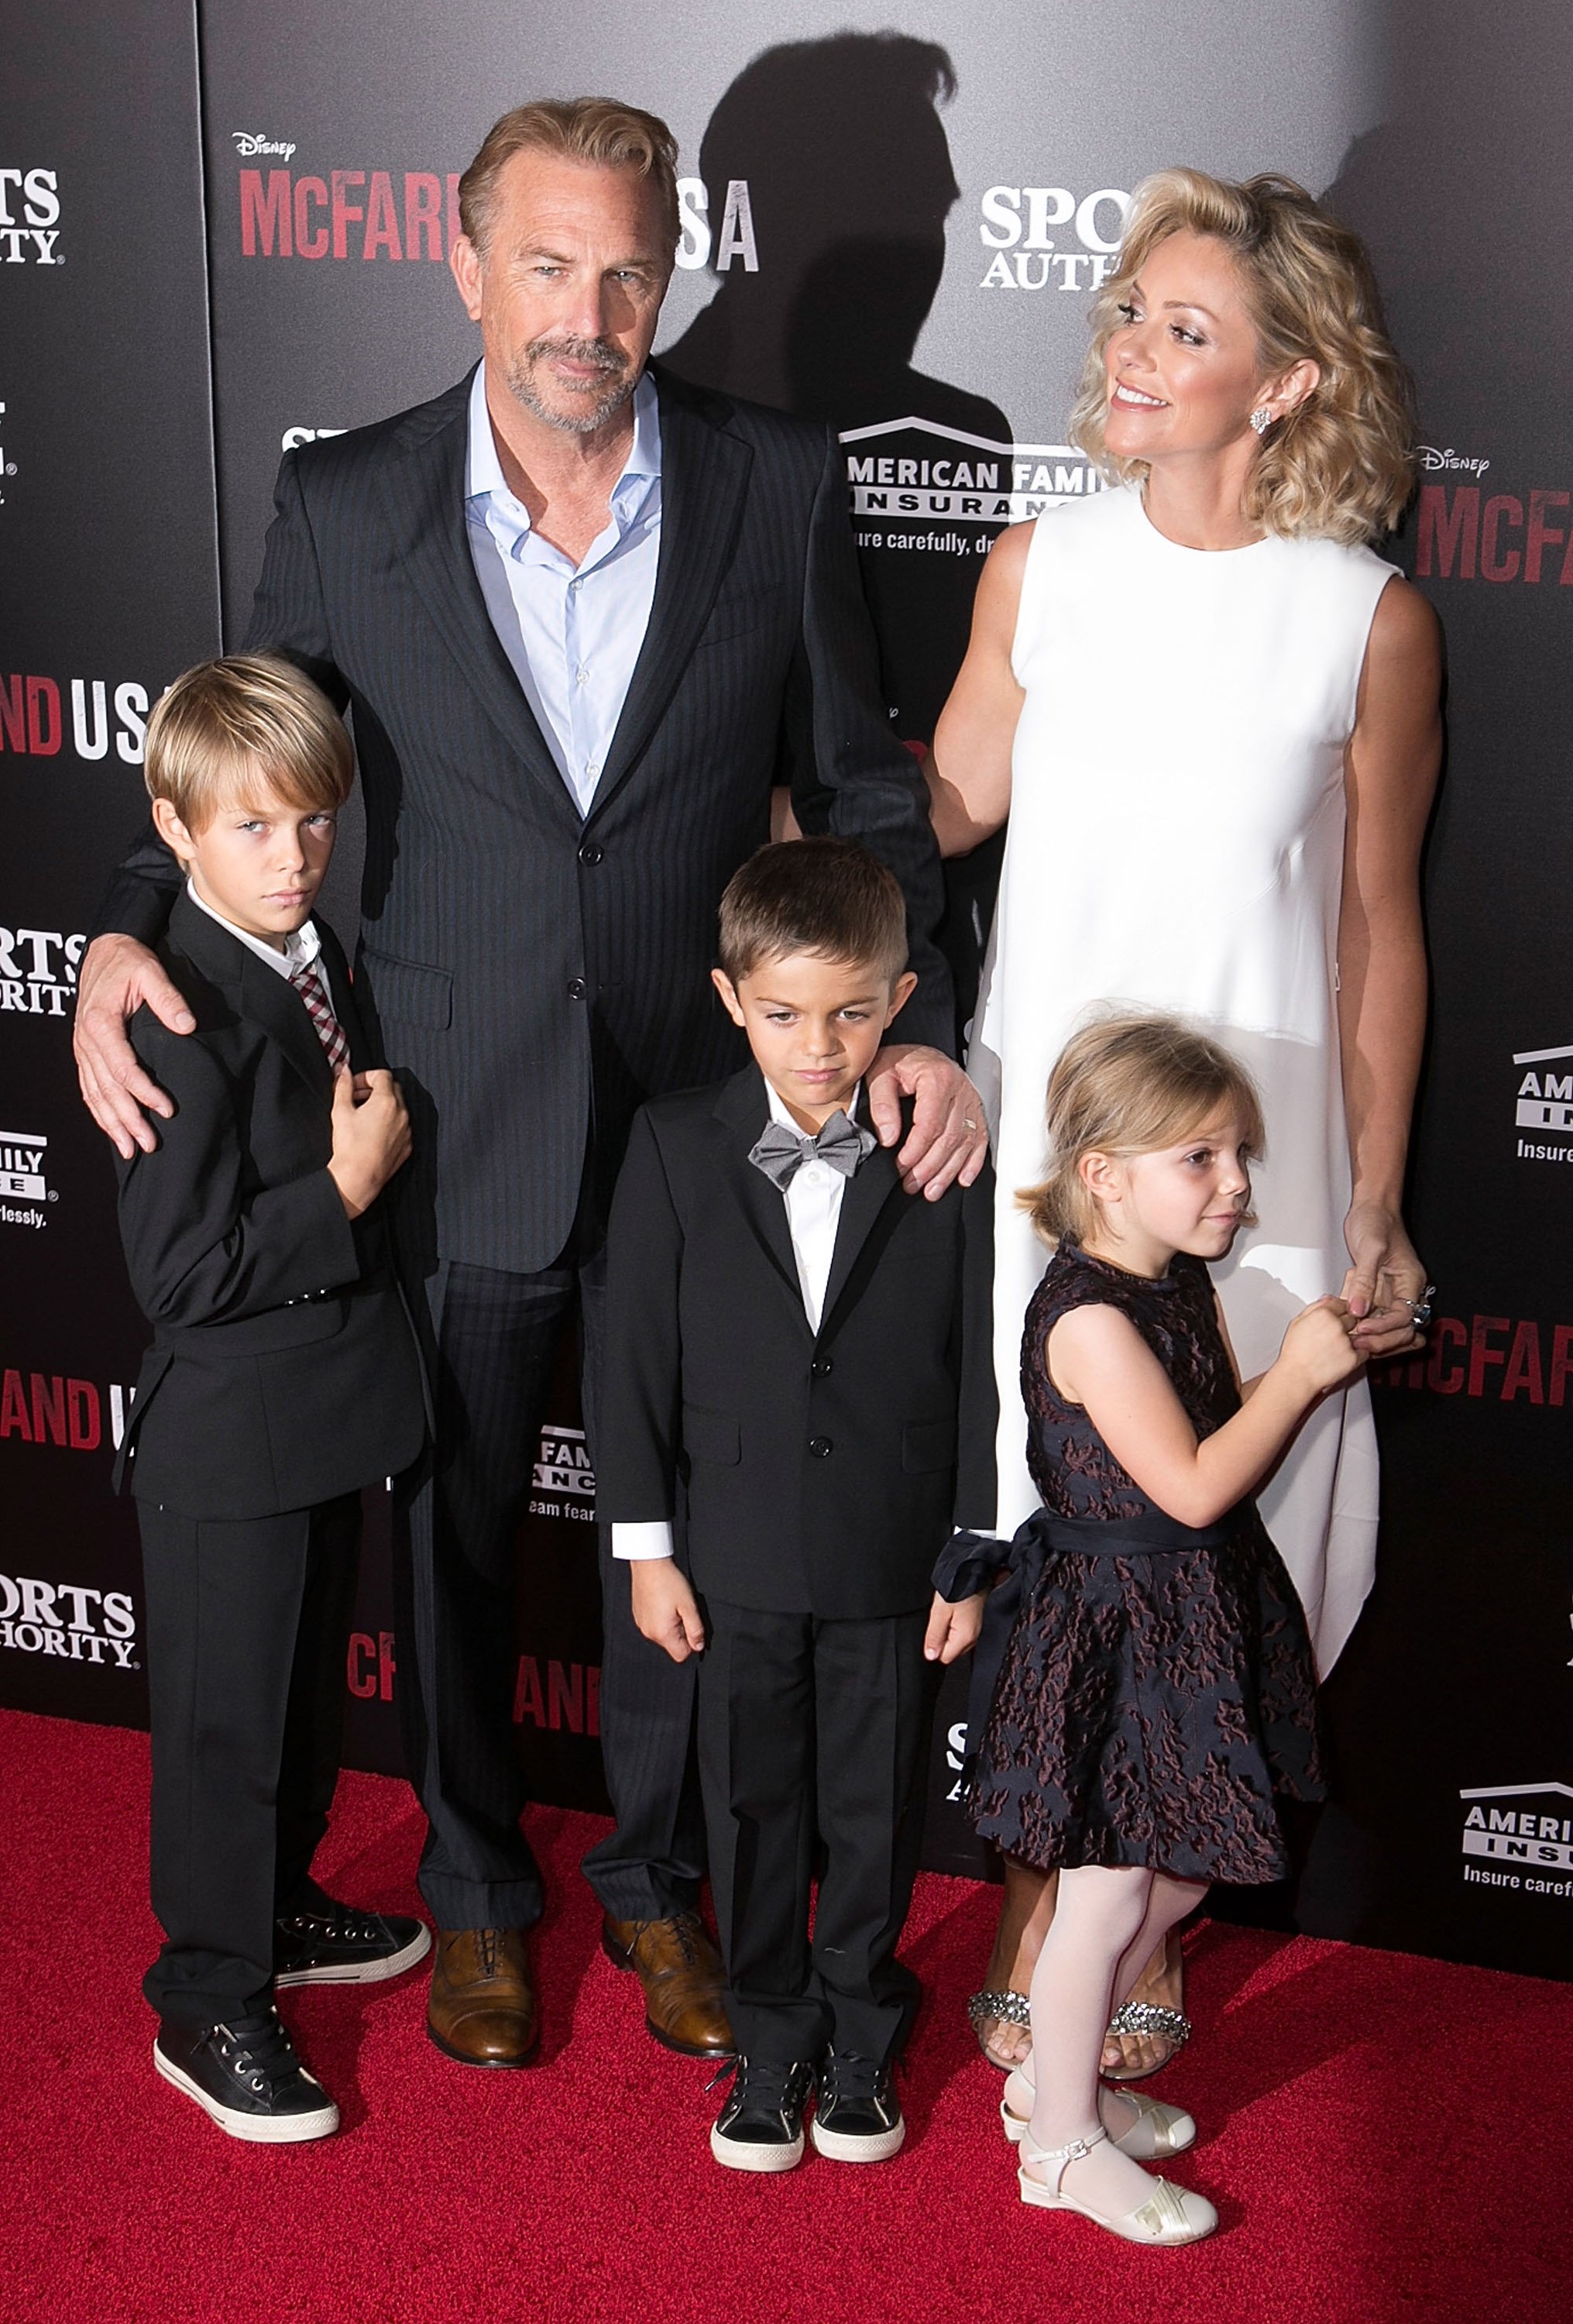 Actor Kevin Costner with Christine Baumgartner and their children at the El Capitan Theatre in Hollywood California on February 9, 2015 | Source: Getty Images